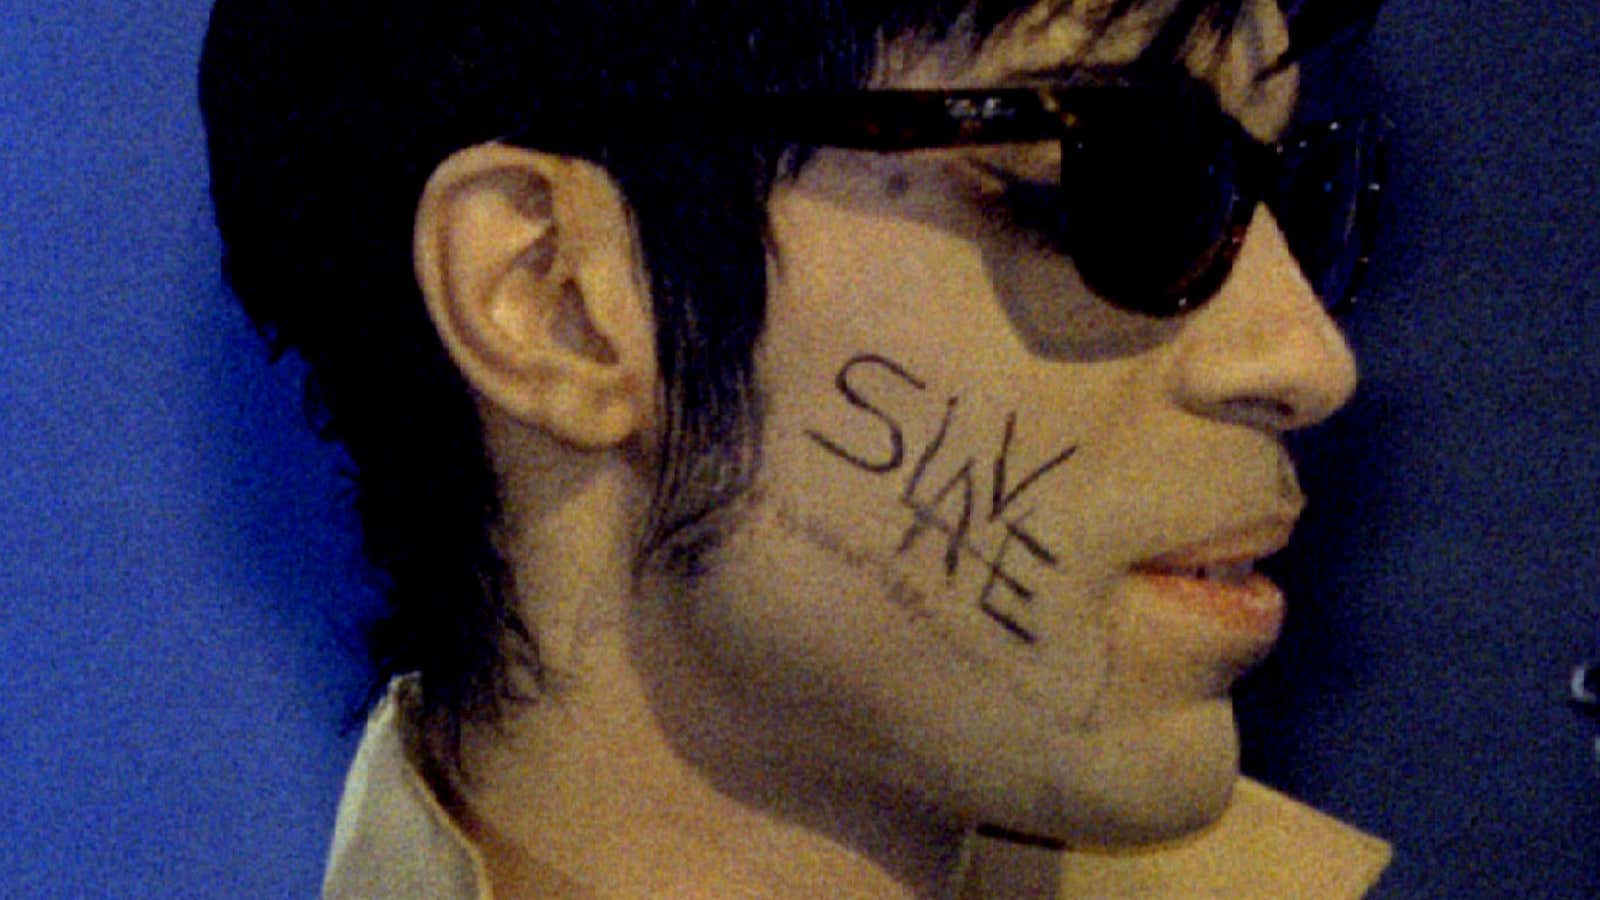 The man formerly known as Prince, with the word â€œSlaveâ€™ written on his cheek, appears at the Brit Awards, the most prestigious event in UK pop music February 20. He was named International Pop Music Star of the Year